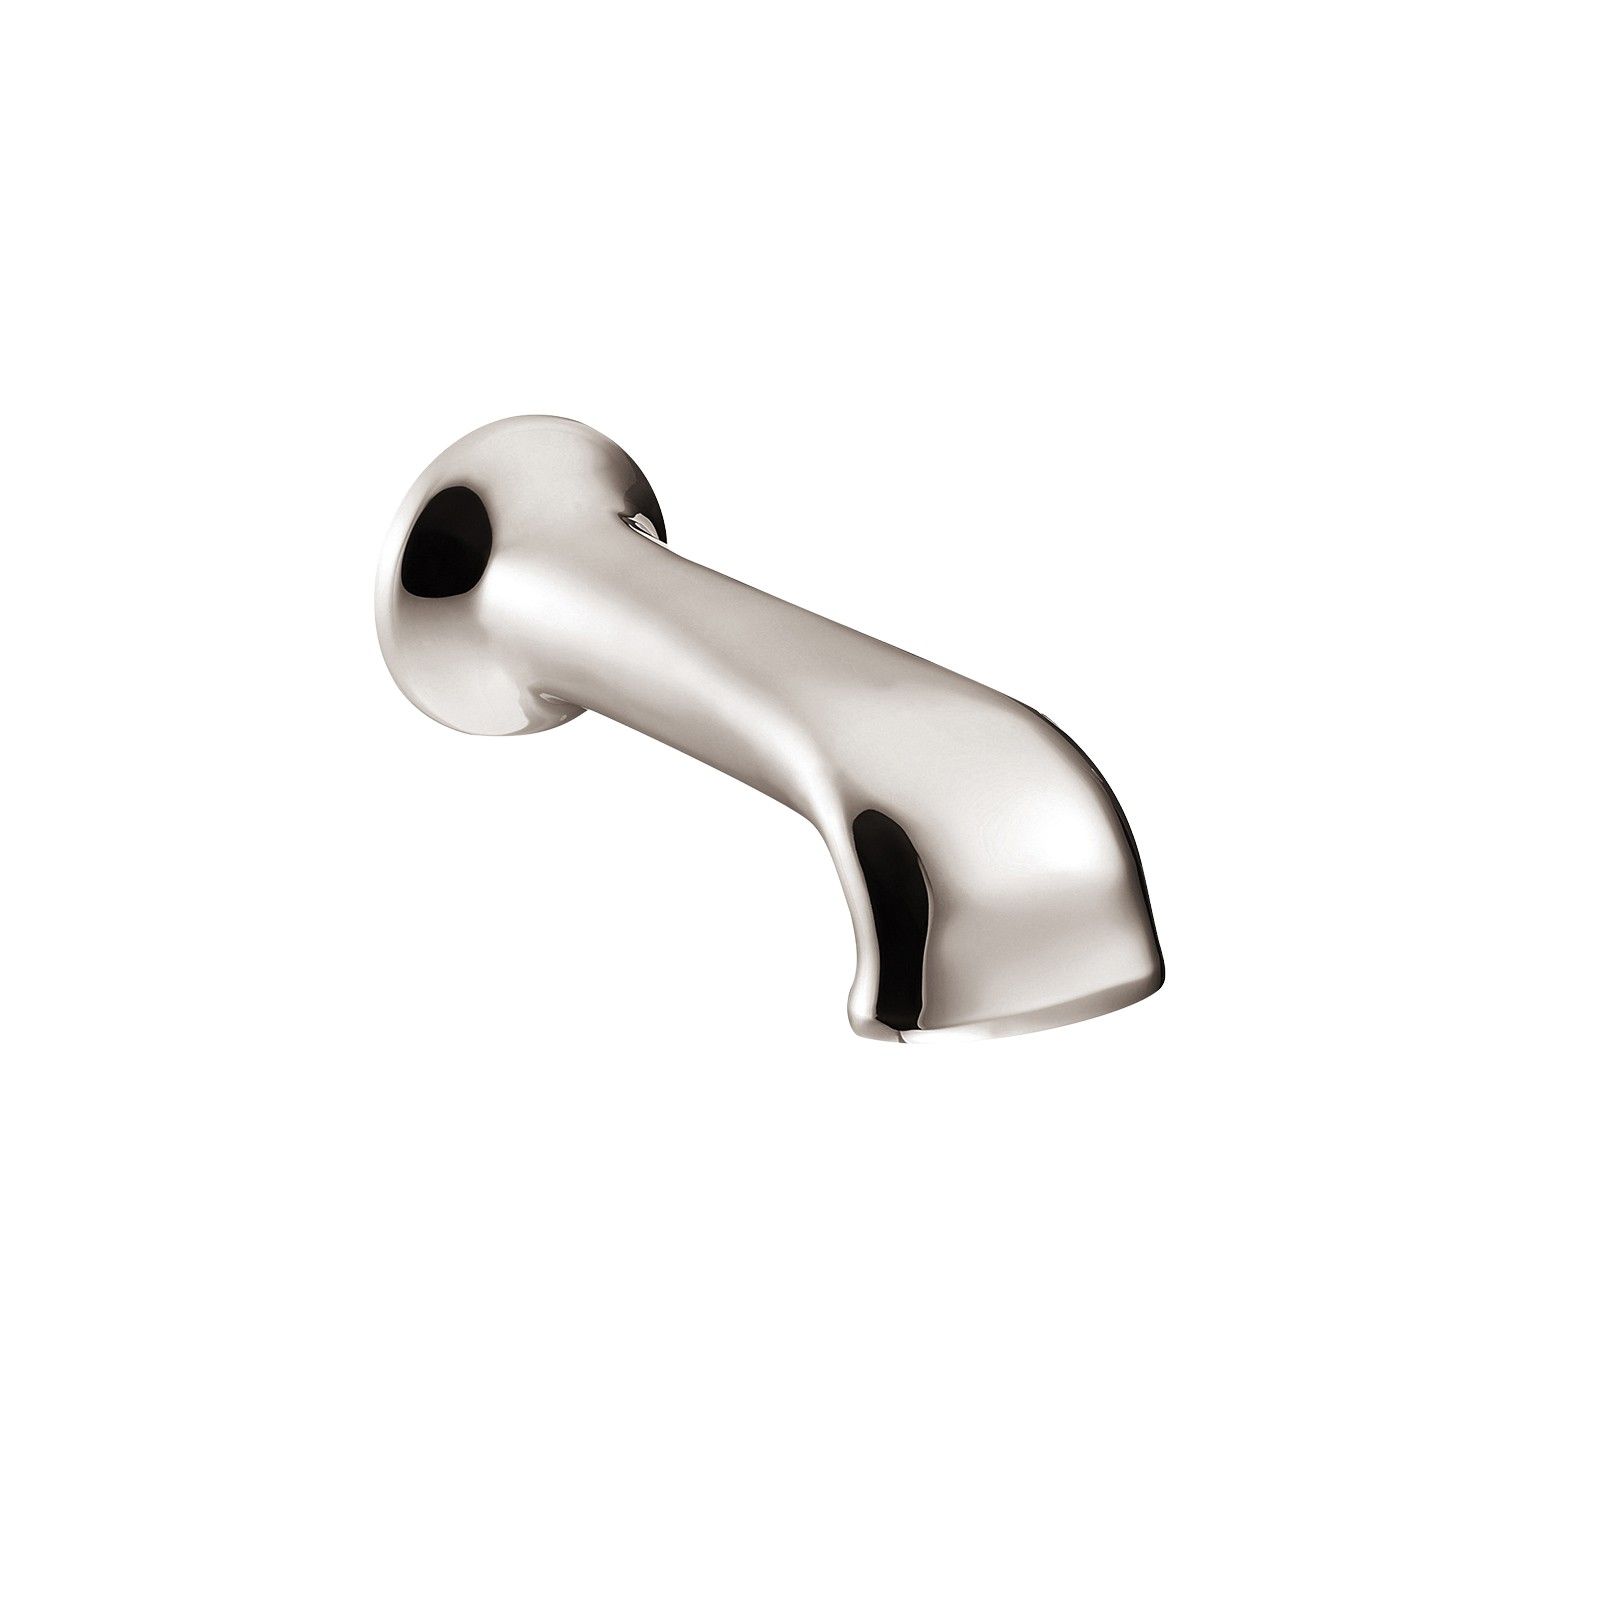 Wall Mounted bath spout 3/4” - in Chrome, Nickel or Copper